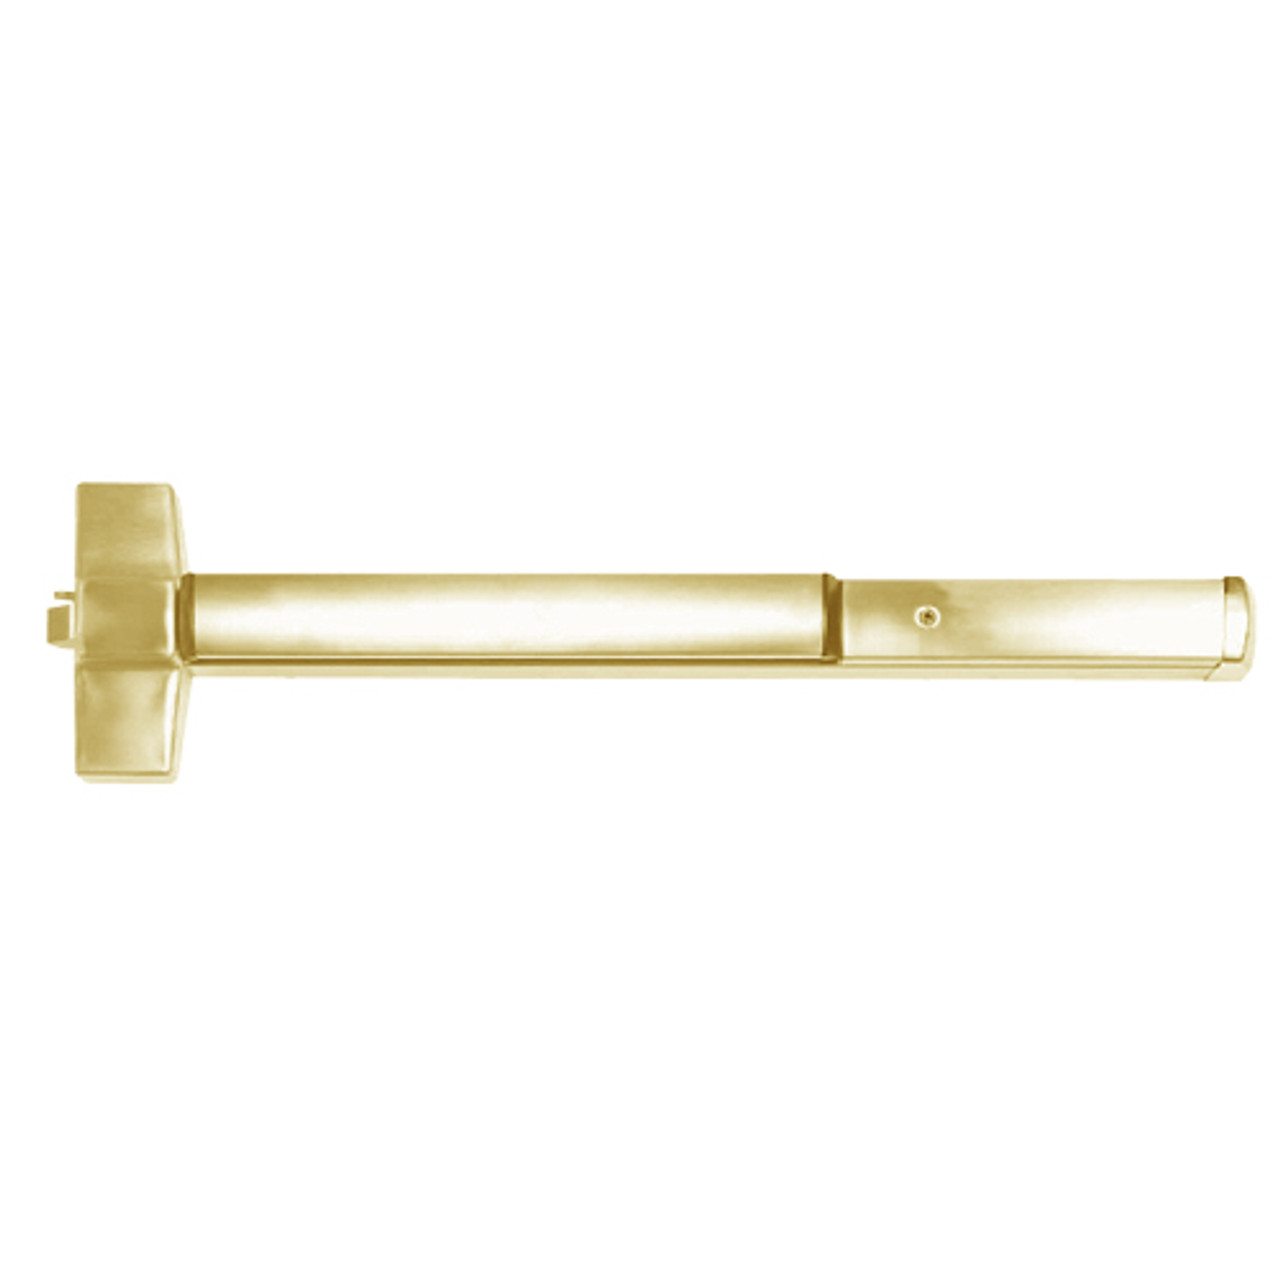 ED5200-606-W048-MELR Corbin ED5200 Series Non Fire Rated Exit Device with Motor Latch Retraction in Satin Brass Finish